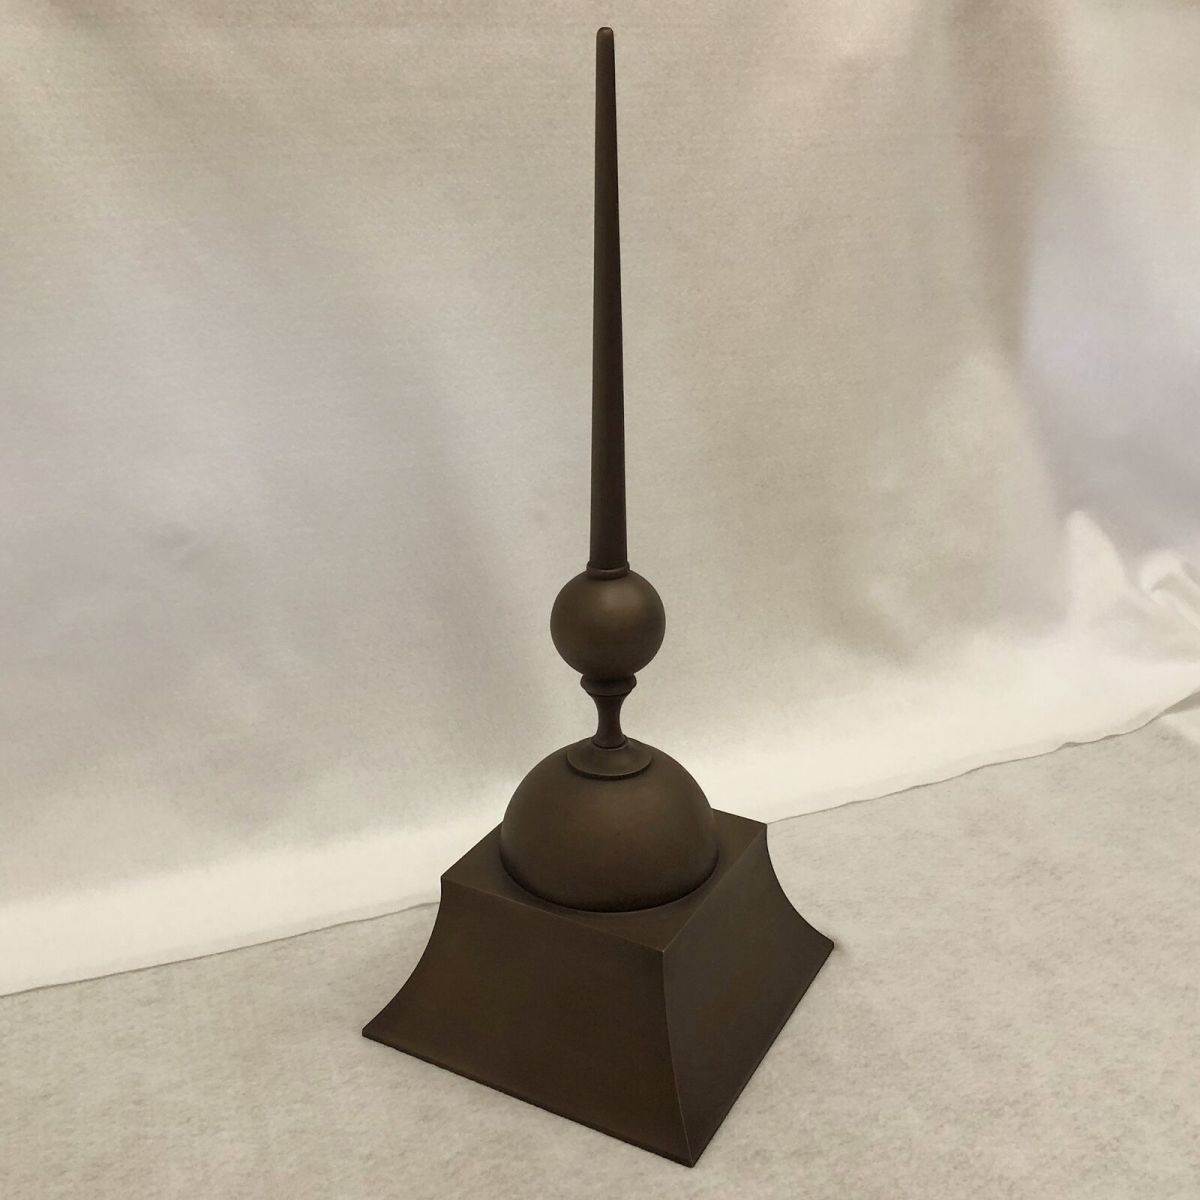 Overall view of the completed finial just prior to packaging and shipping.